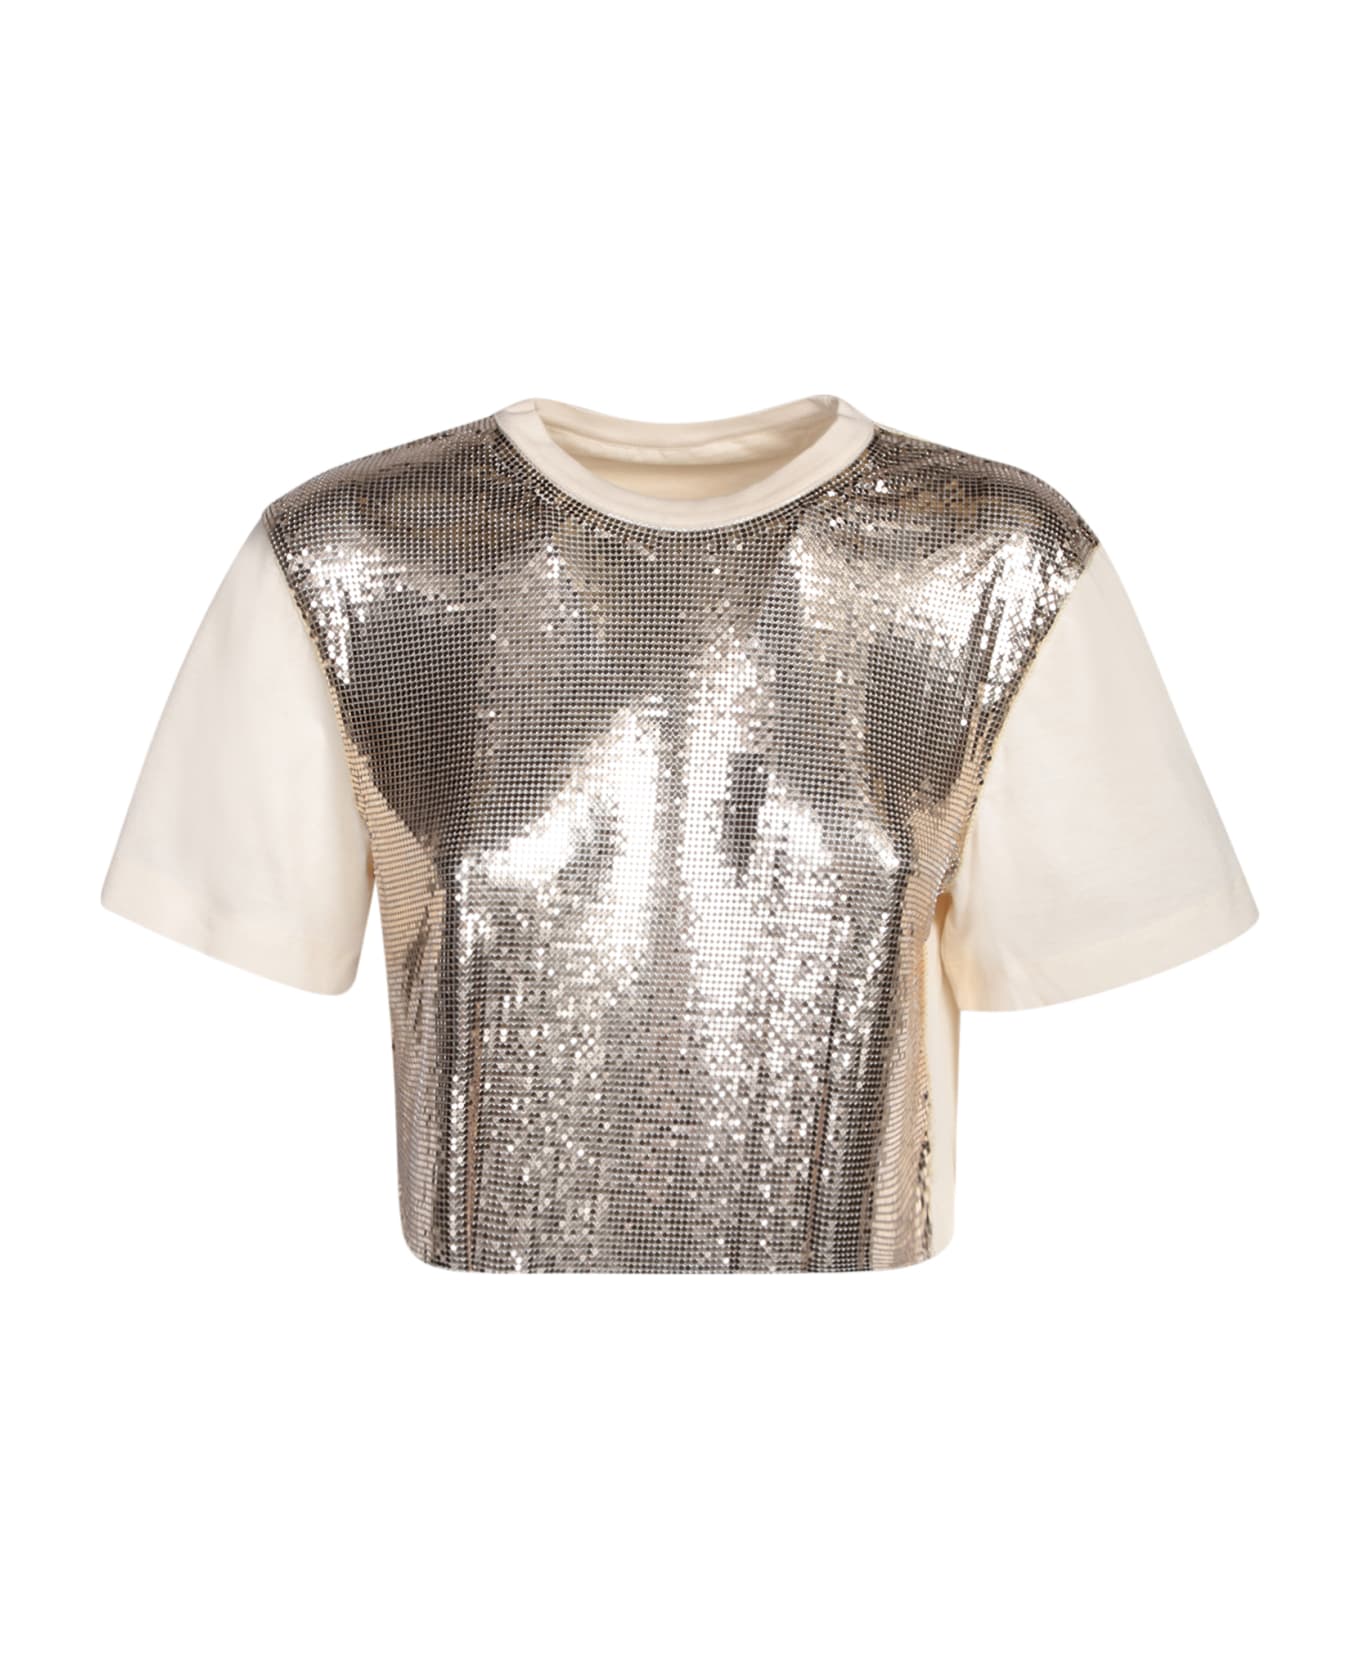 Paco Rabanne Nude Top In Shiny Mix-mesh - Pink